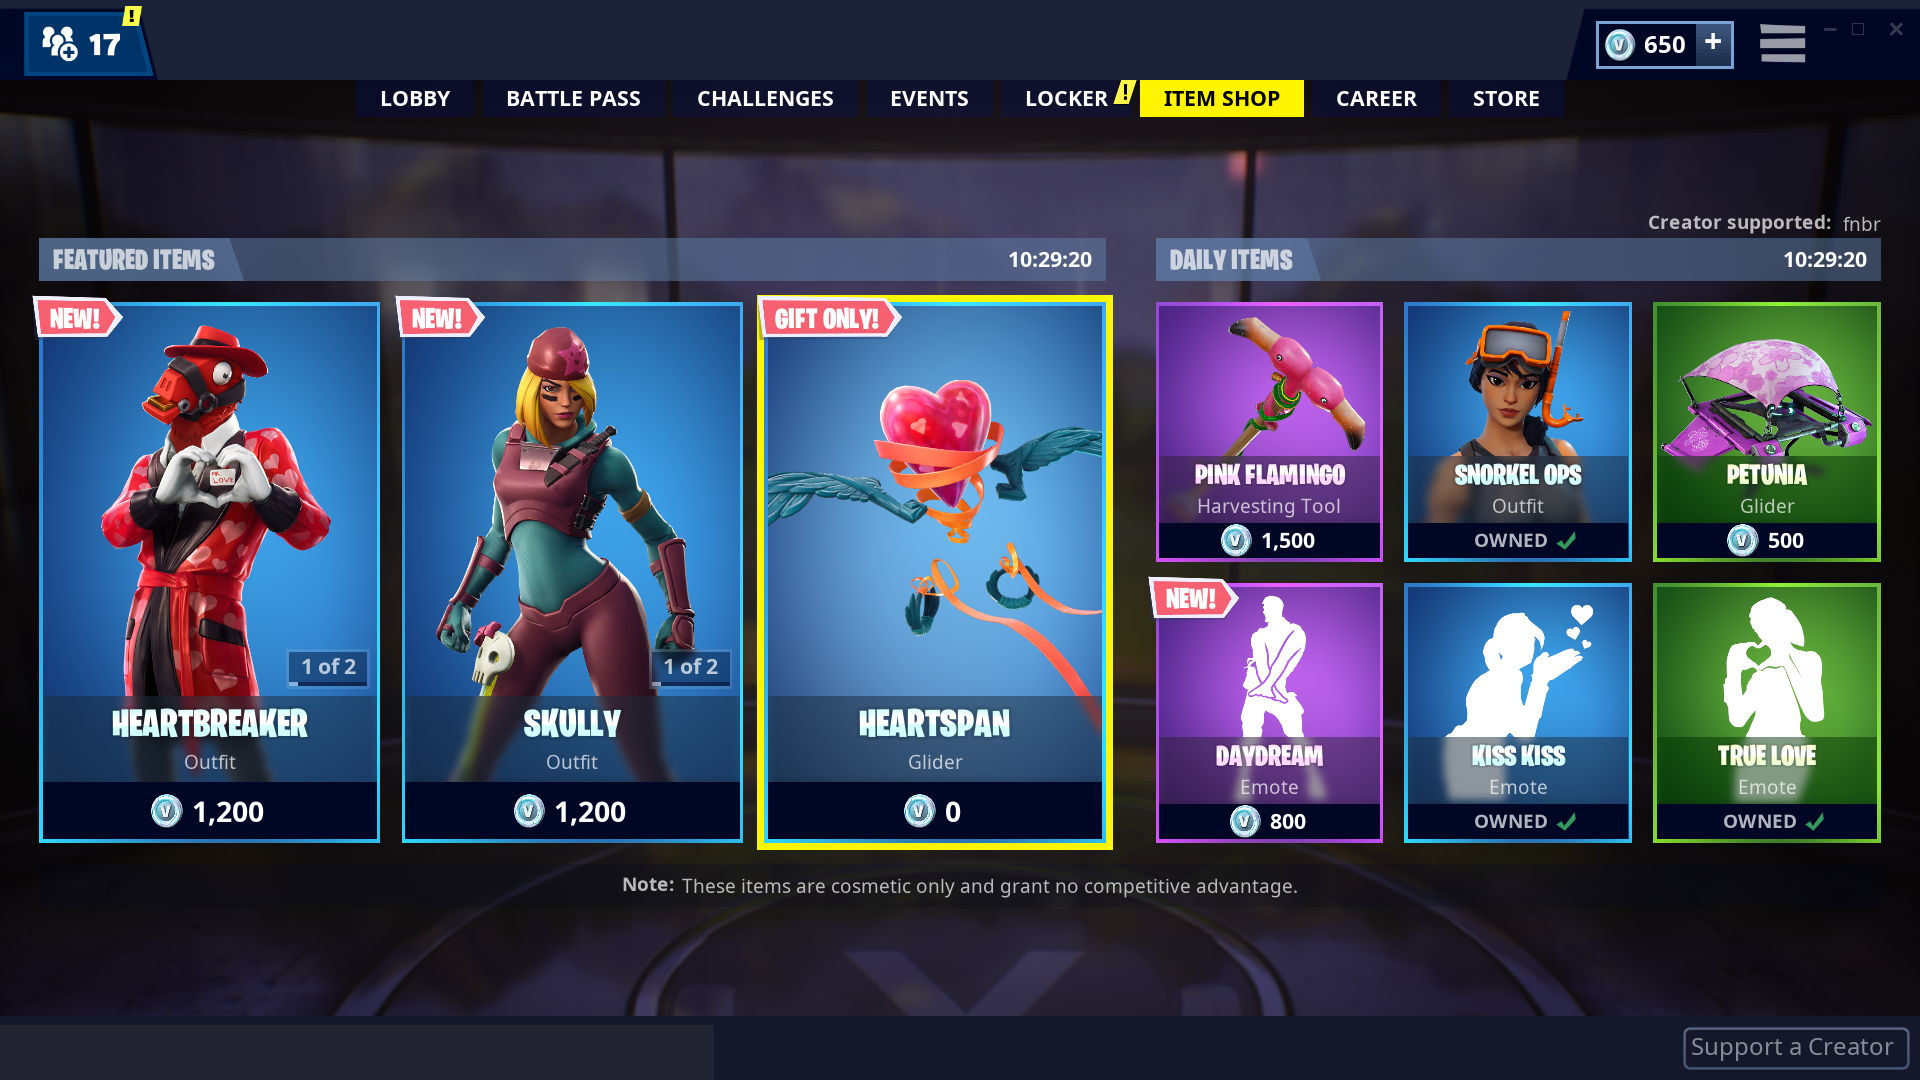 head to the item shop tab and select the heartspan panel - fortnite generator challenge